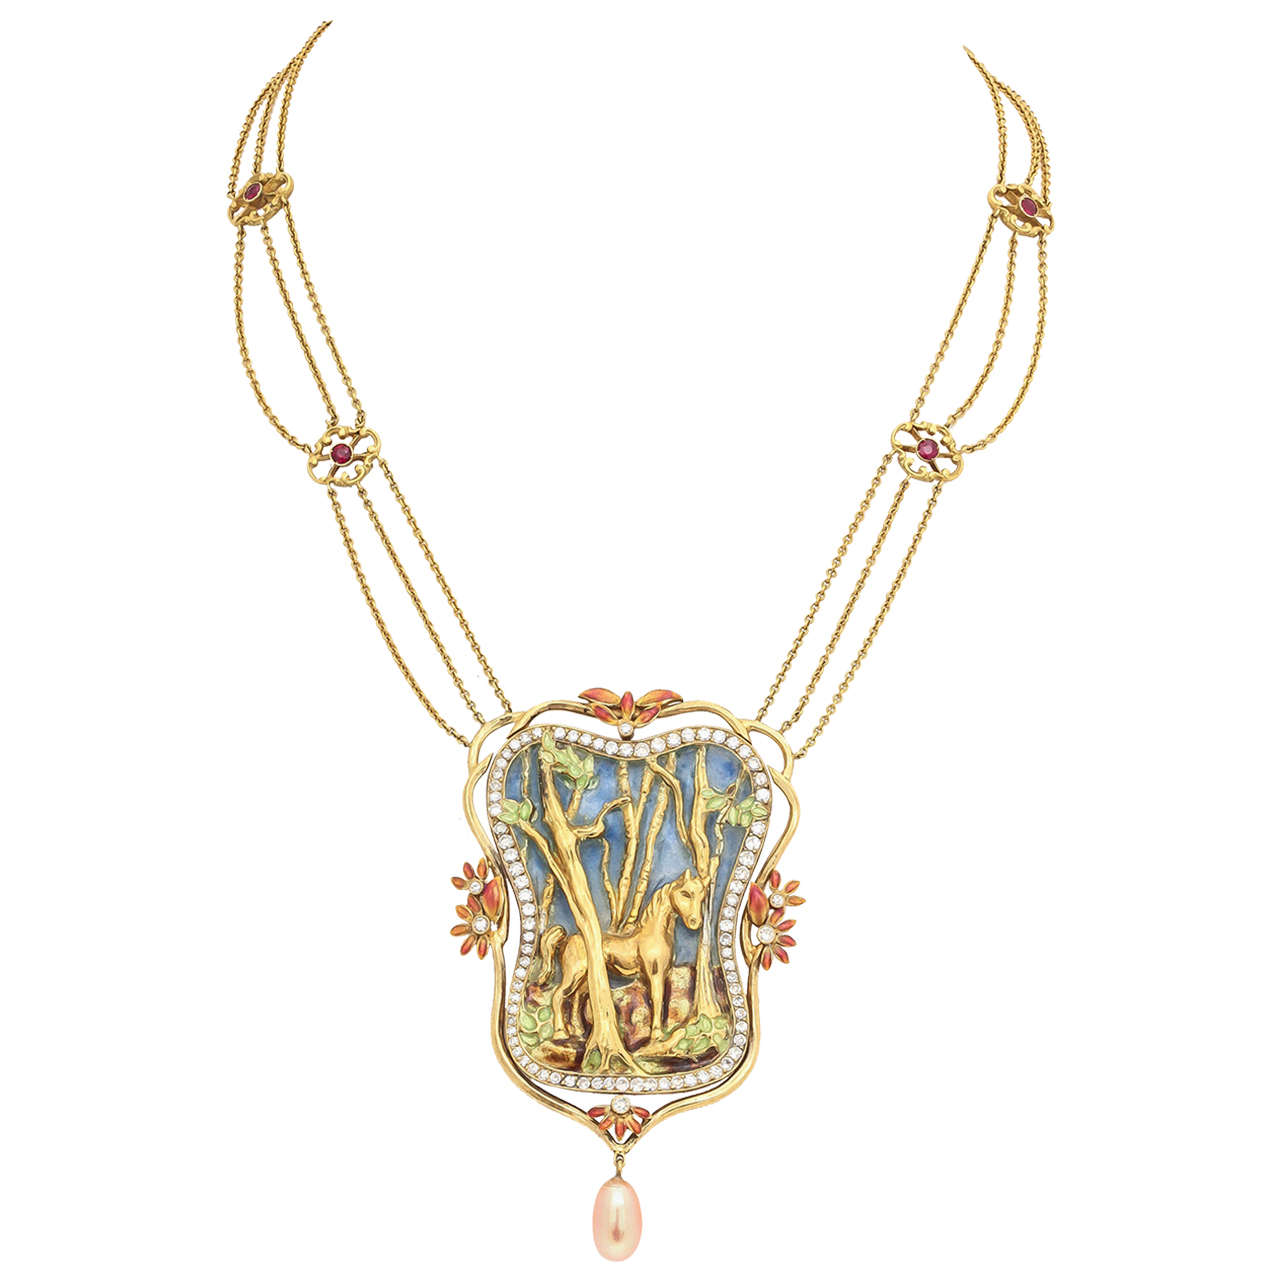 This one of a kind, museum quality necklace is breath taking. All in 18 kt gold, the horse stands among the trees in an enchanted forest under a blue plique-a-jour enamel sky. Plique-a-jour is French for "letting in daylight." It is the